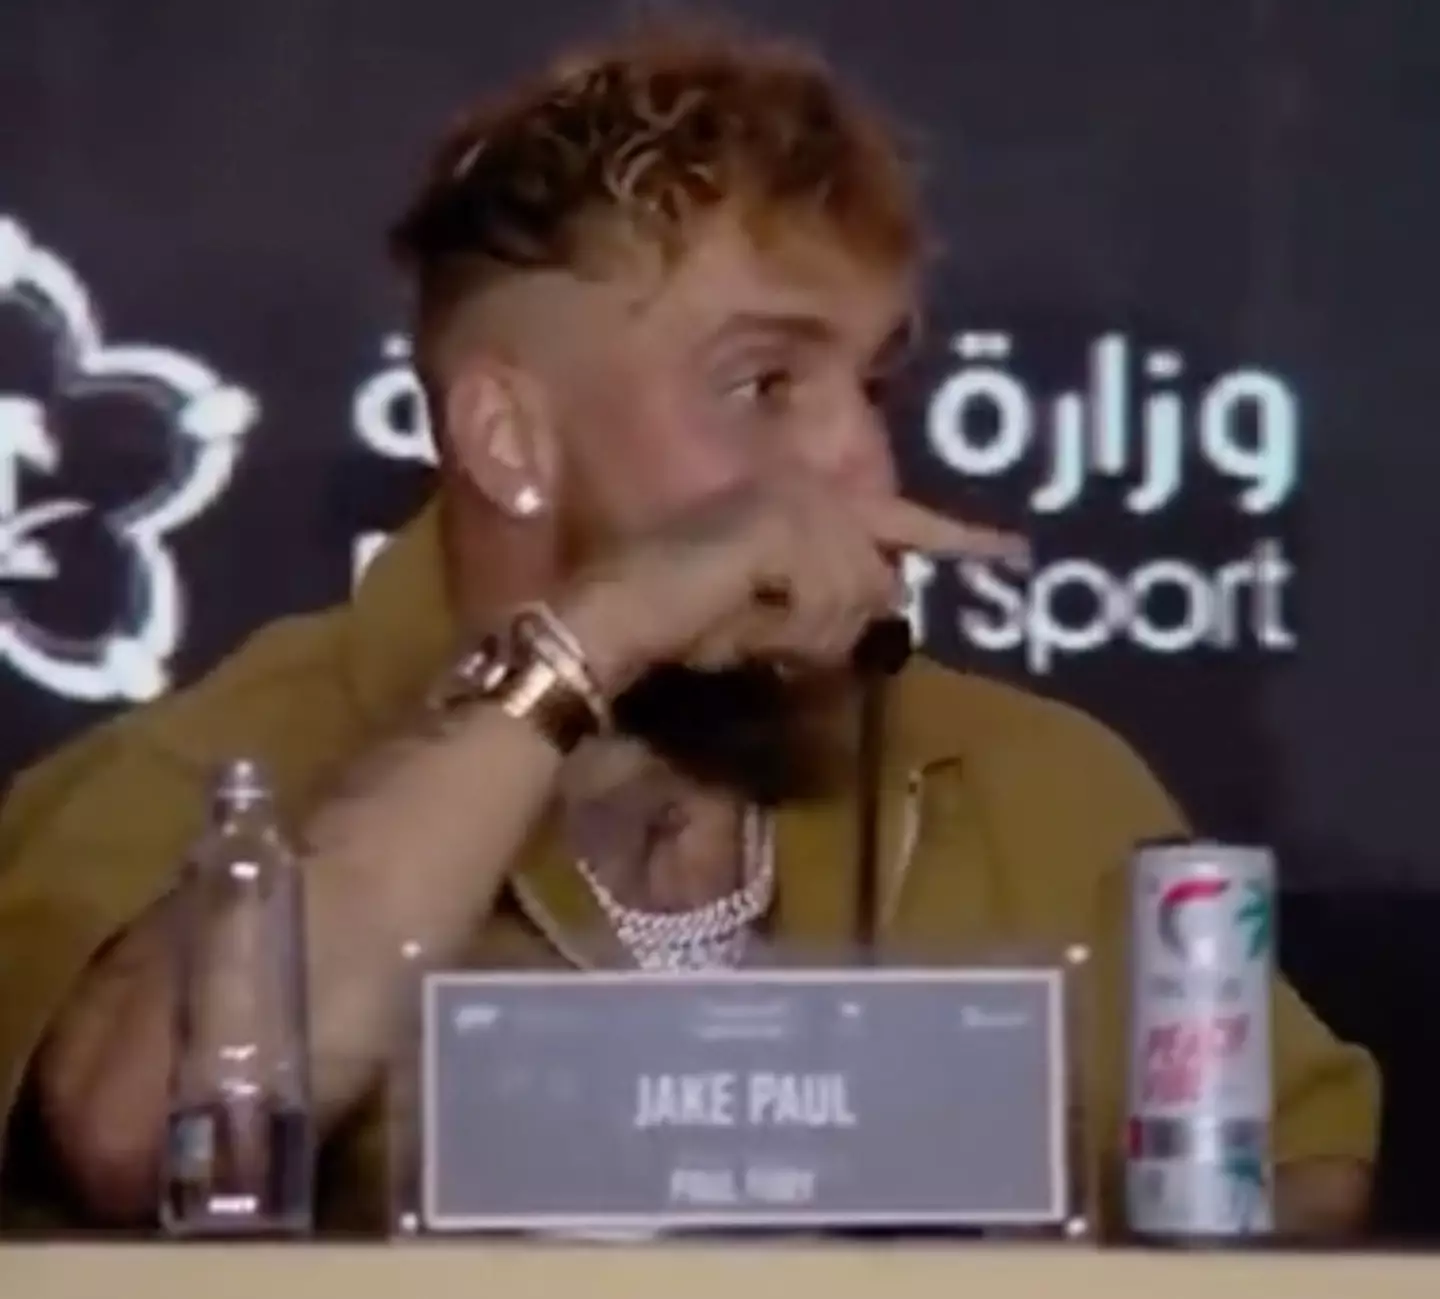 Jake Paul offered Tommy Fury an 'all or nothing' deal.